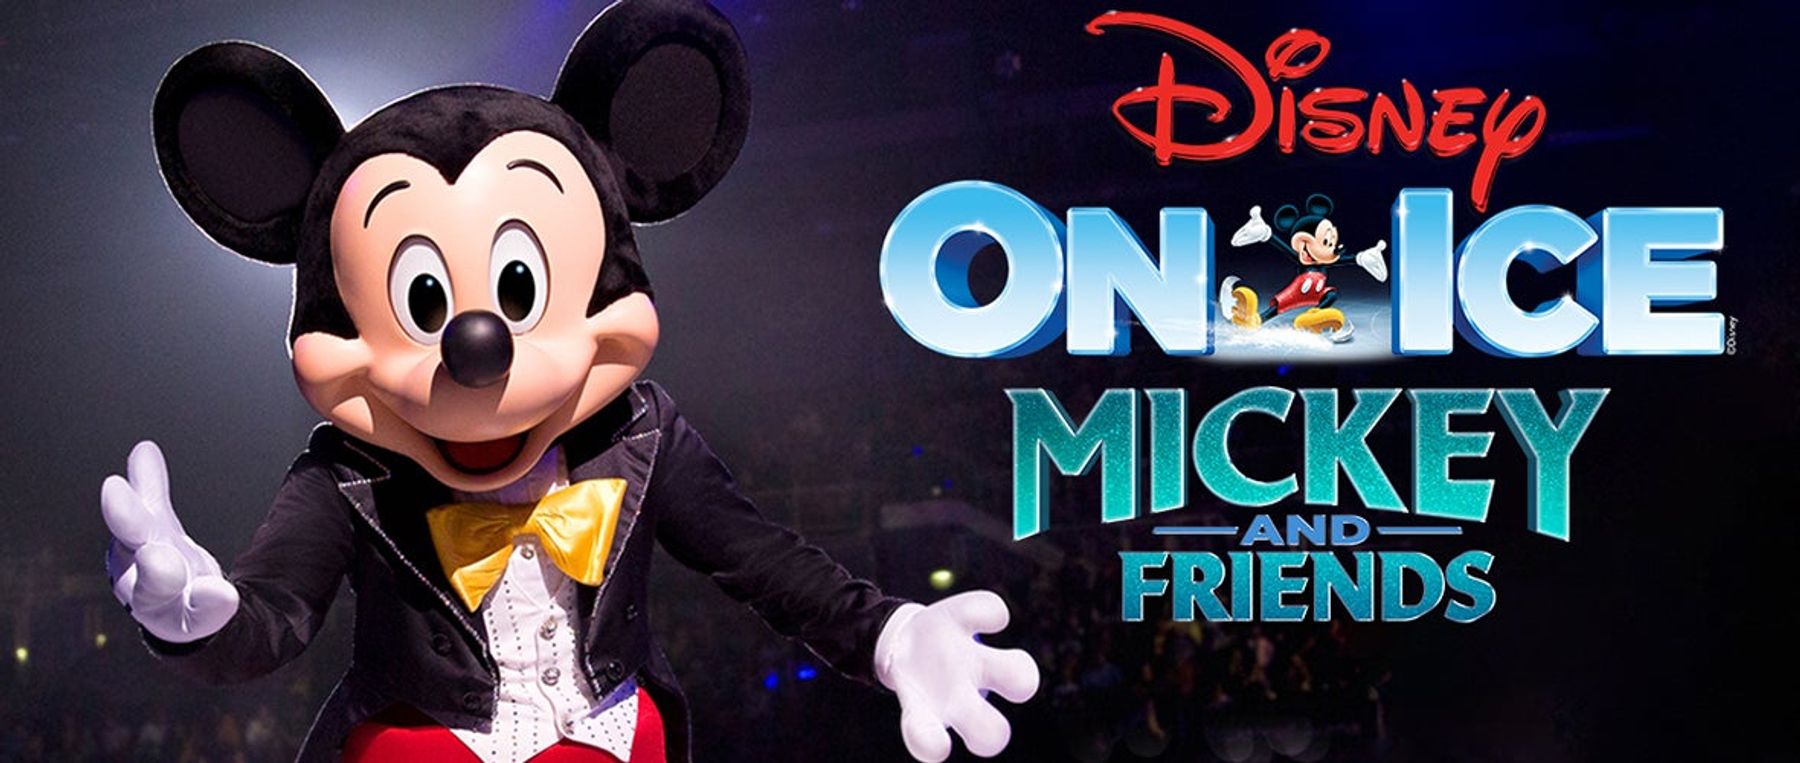 Disney on Ice Presents Mickey and Friends Downtown Indianapolis